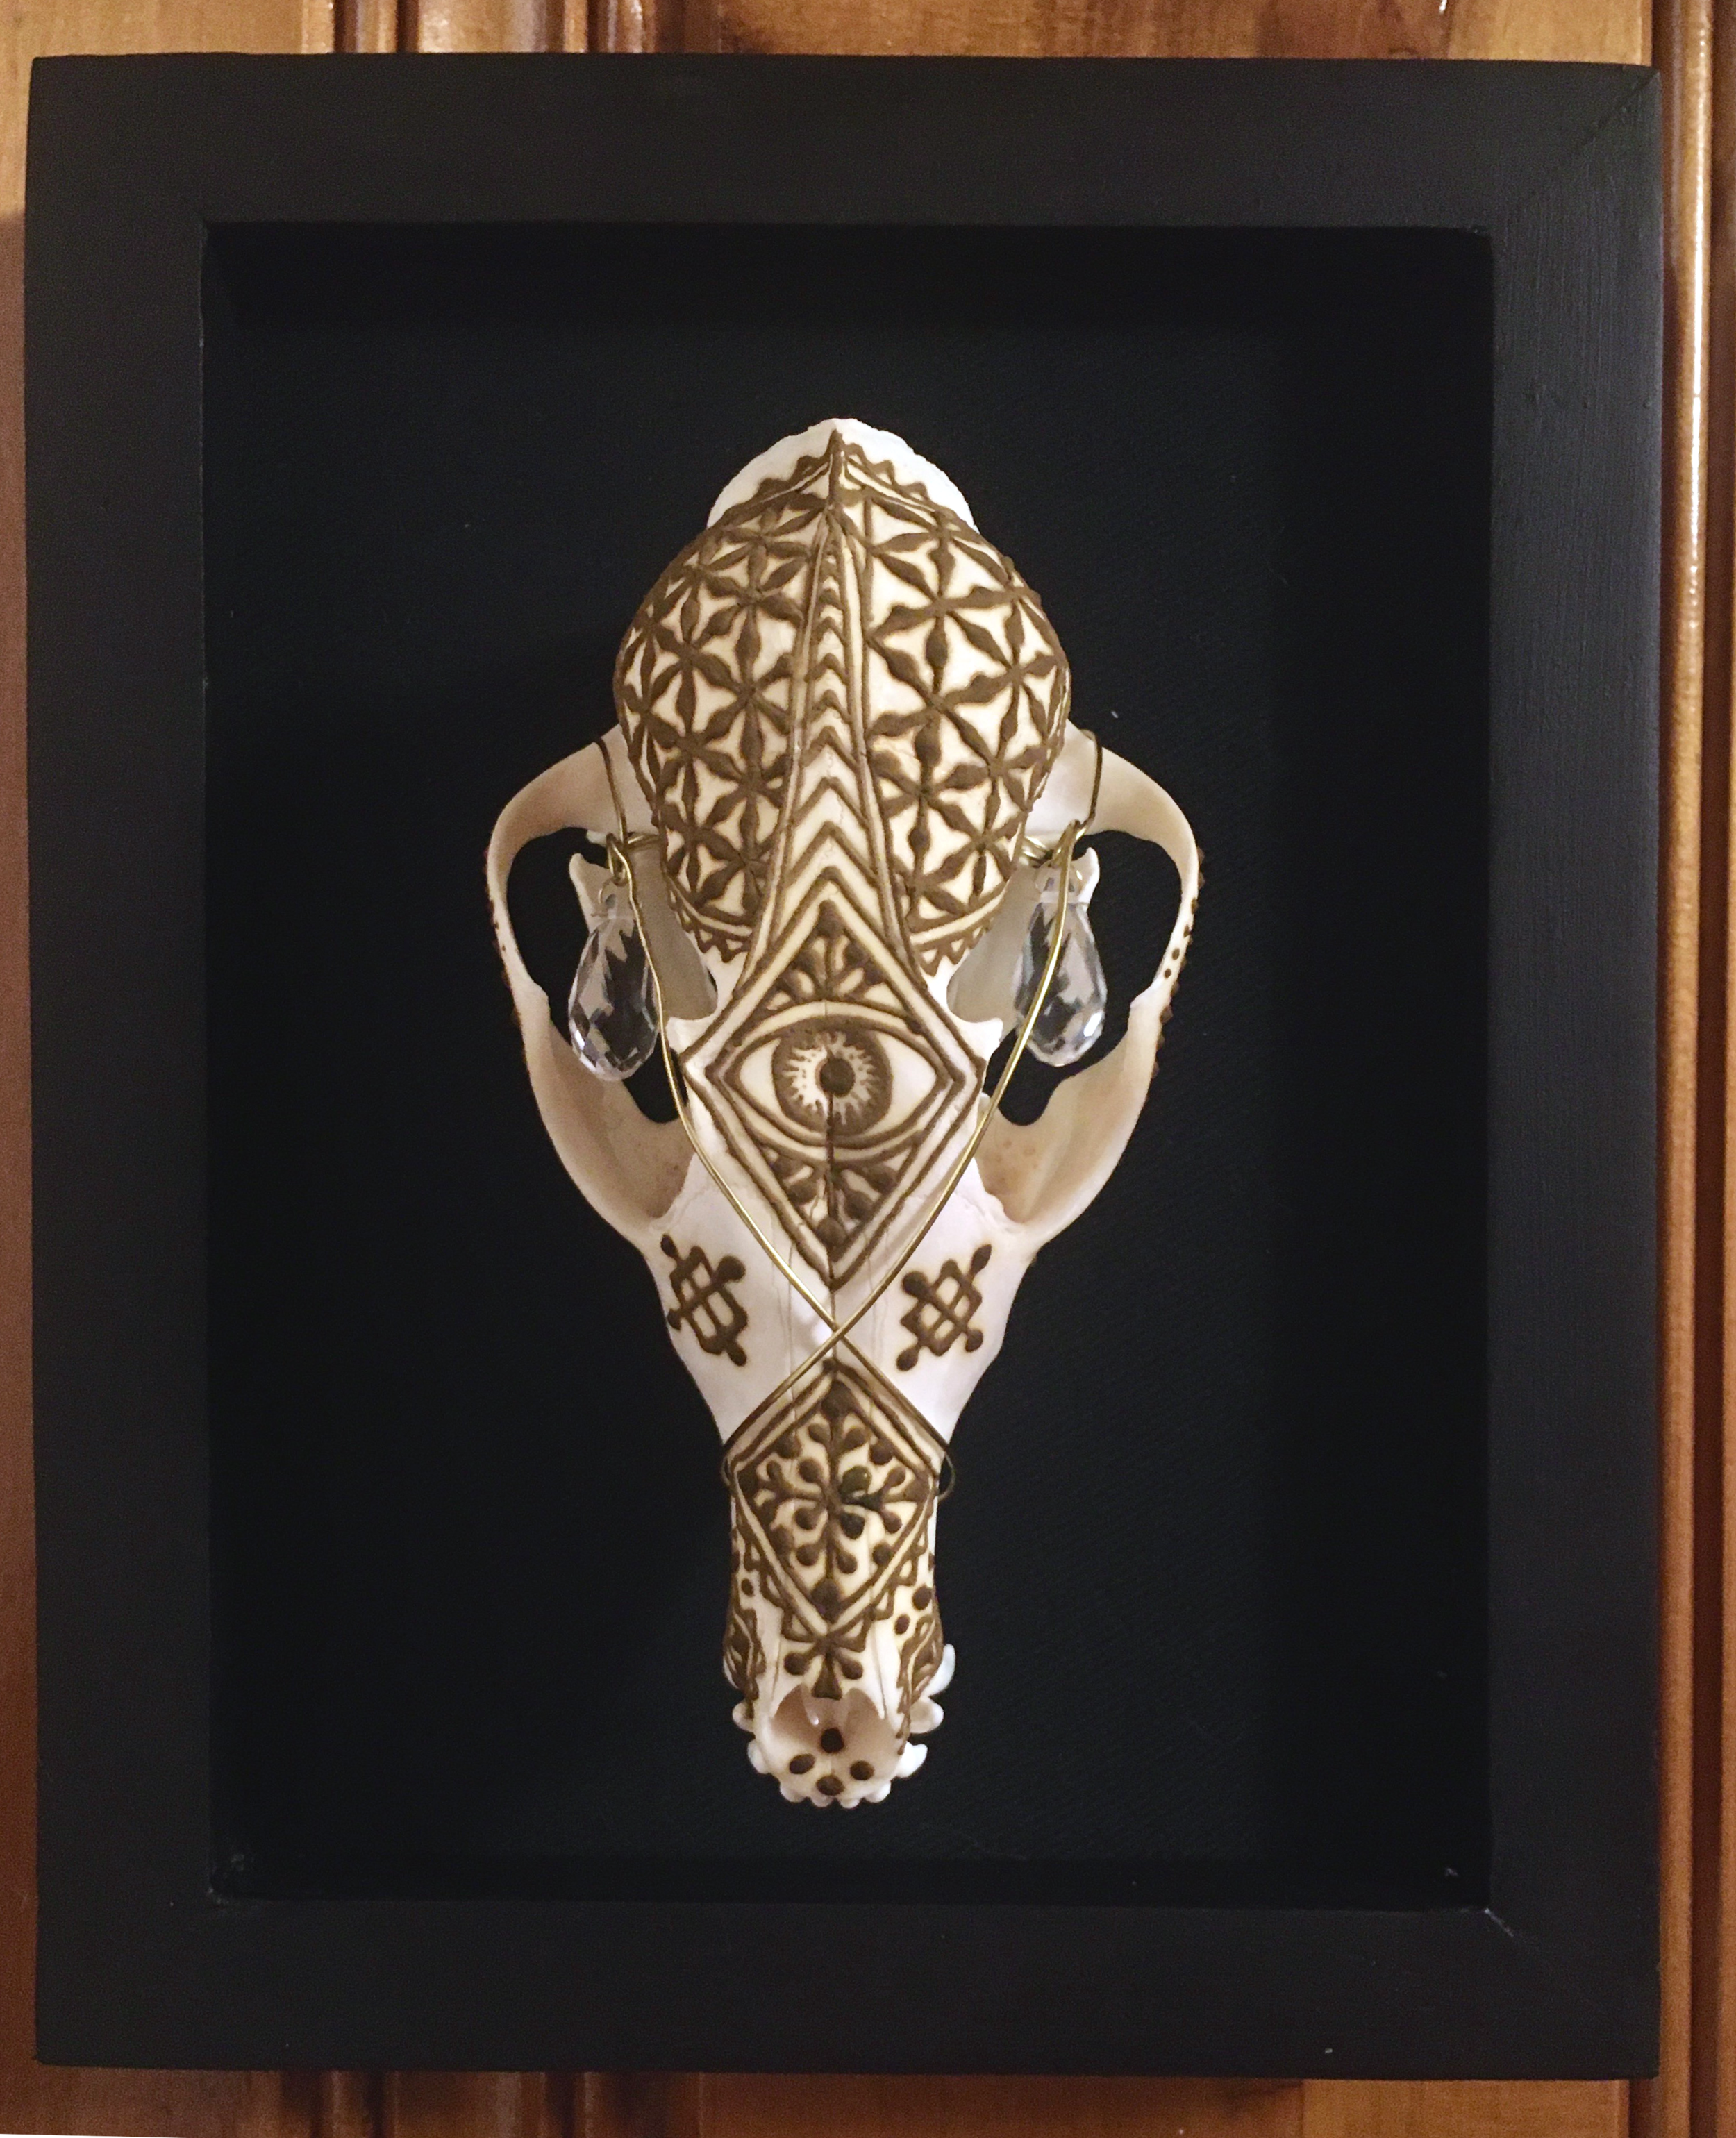  Fox Skull  Henna on bone with wire and prisms 